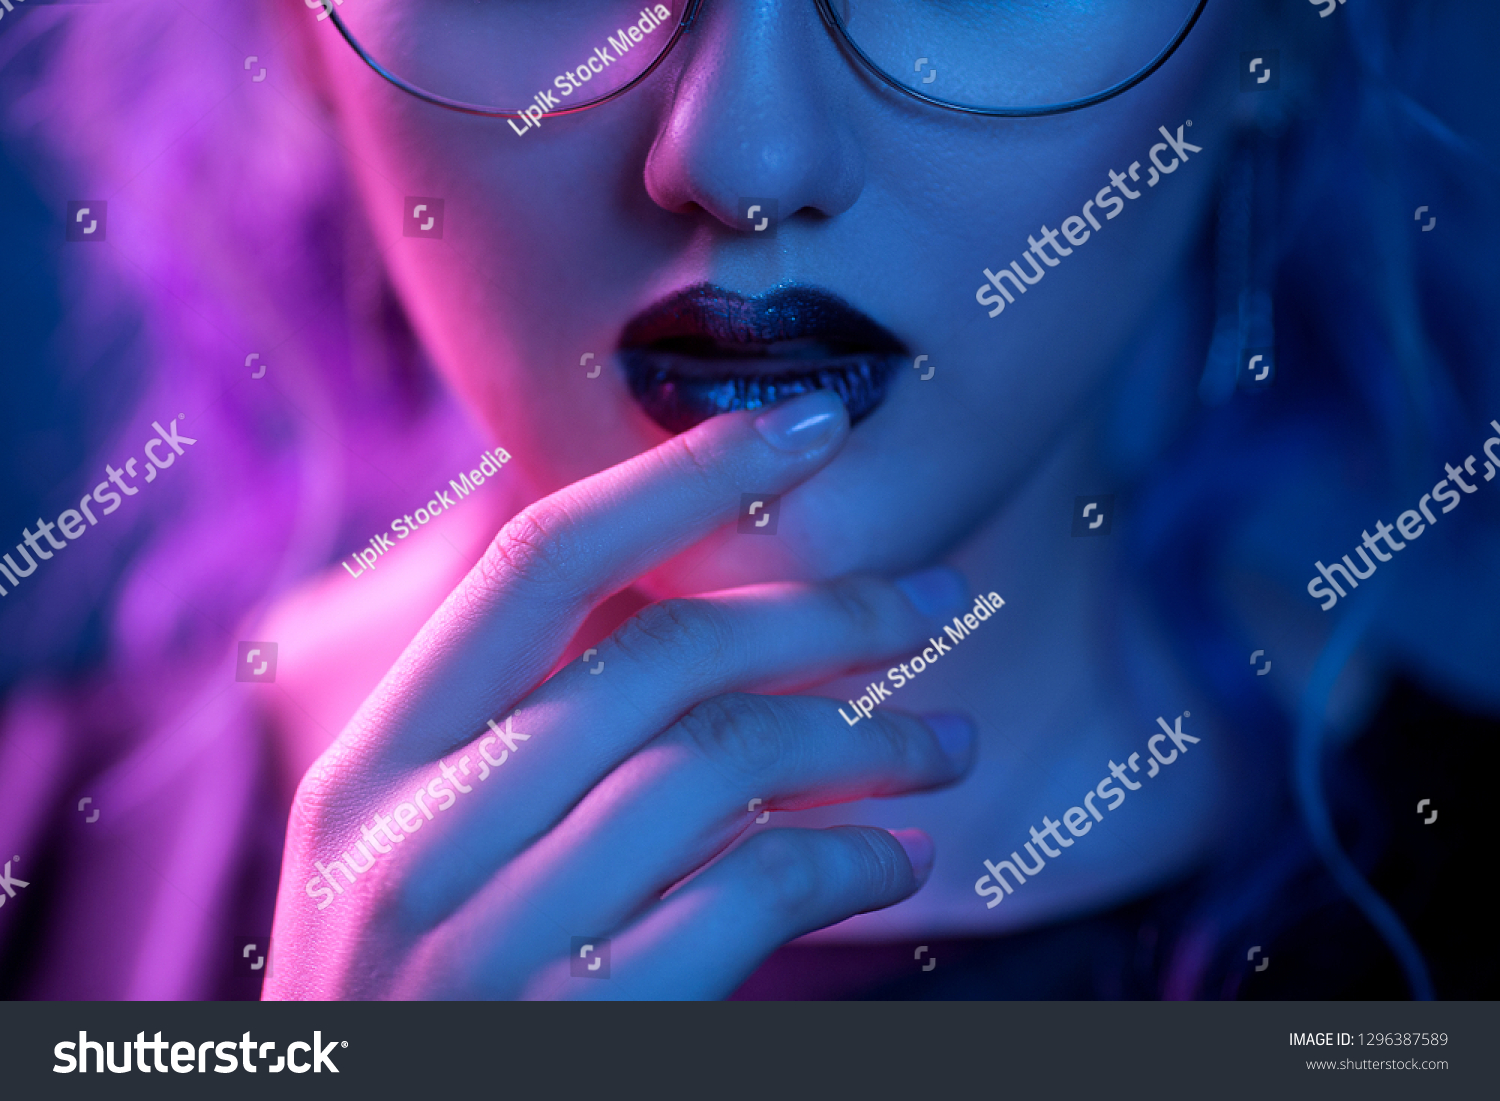 Sensitive Girl Touching Bright Lips. Wearing Glasses. Posing In Blue Light. Creative Make Up Concept. #1296387589